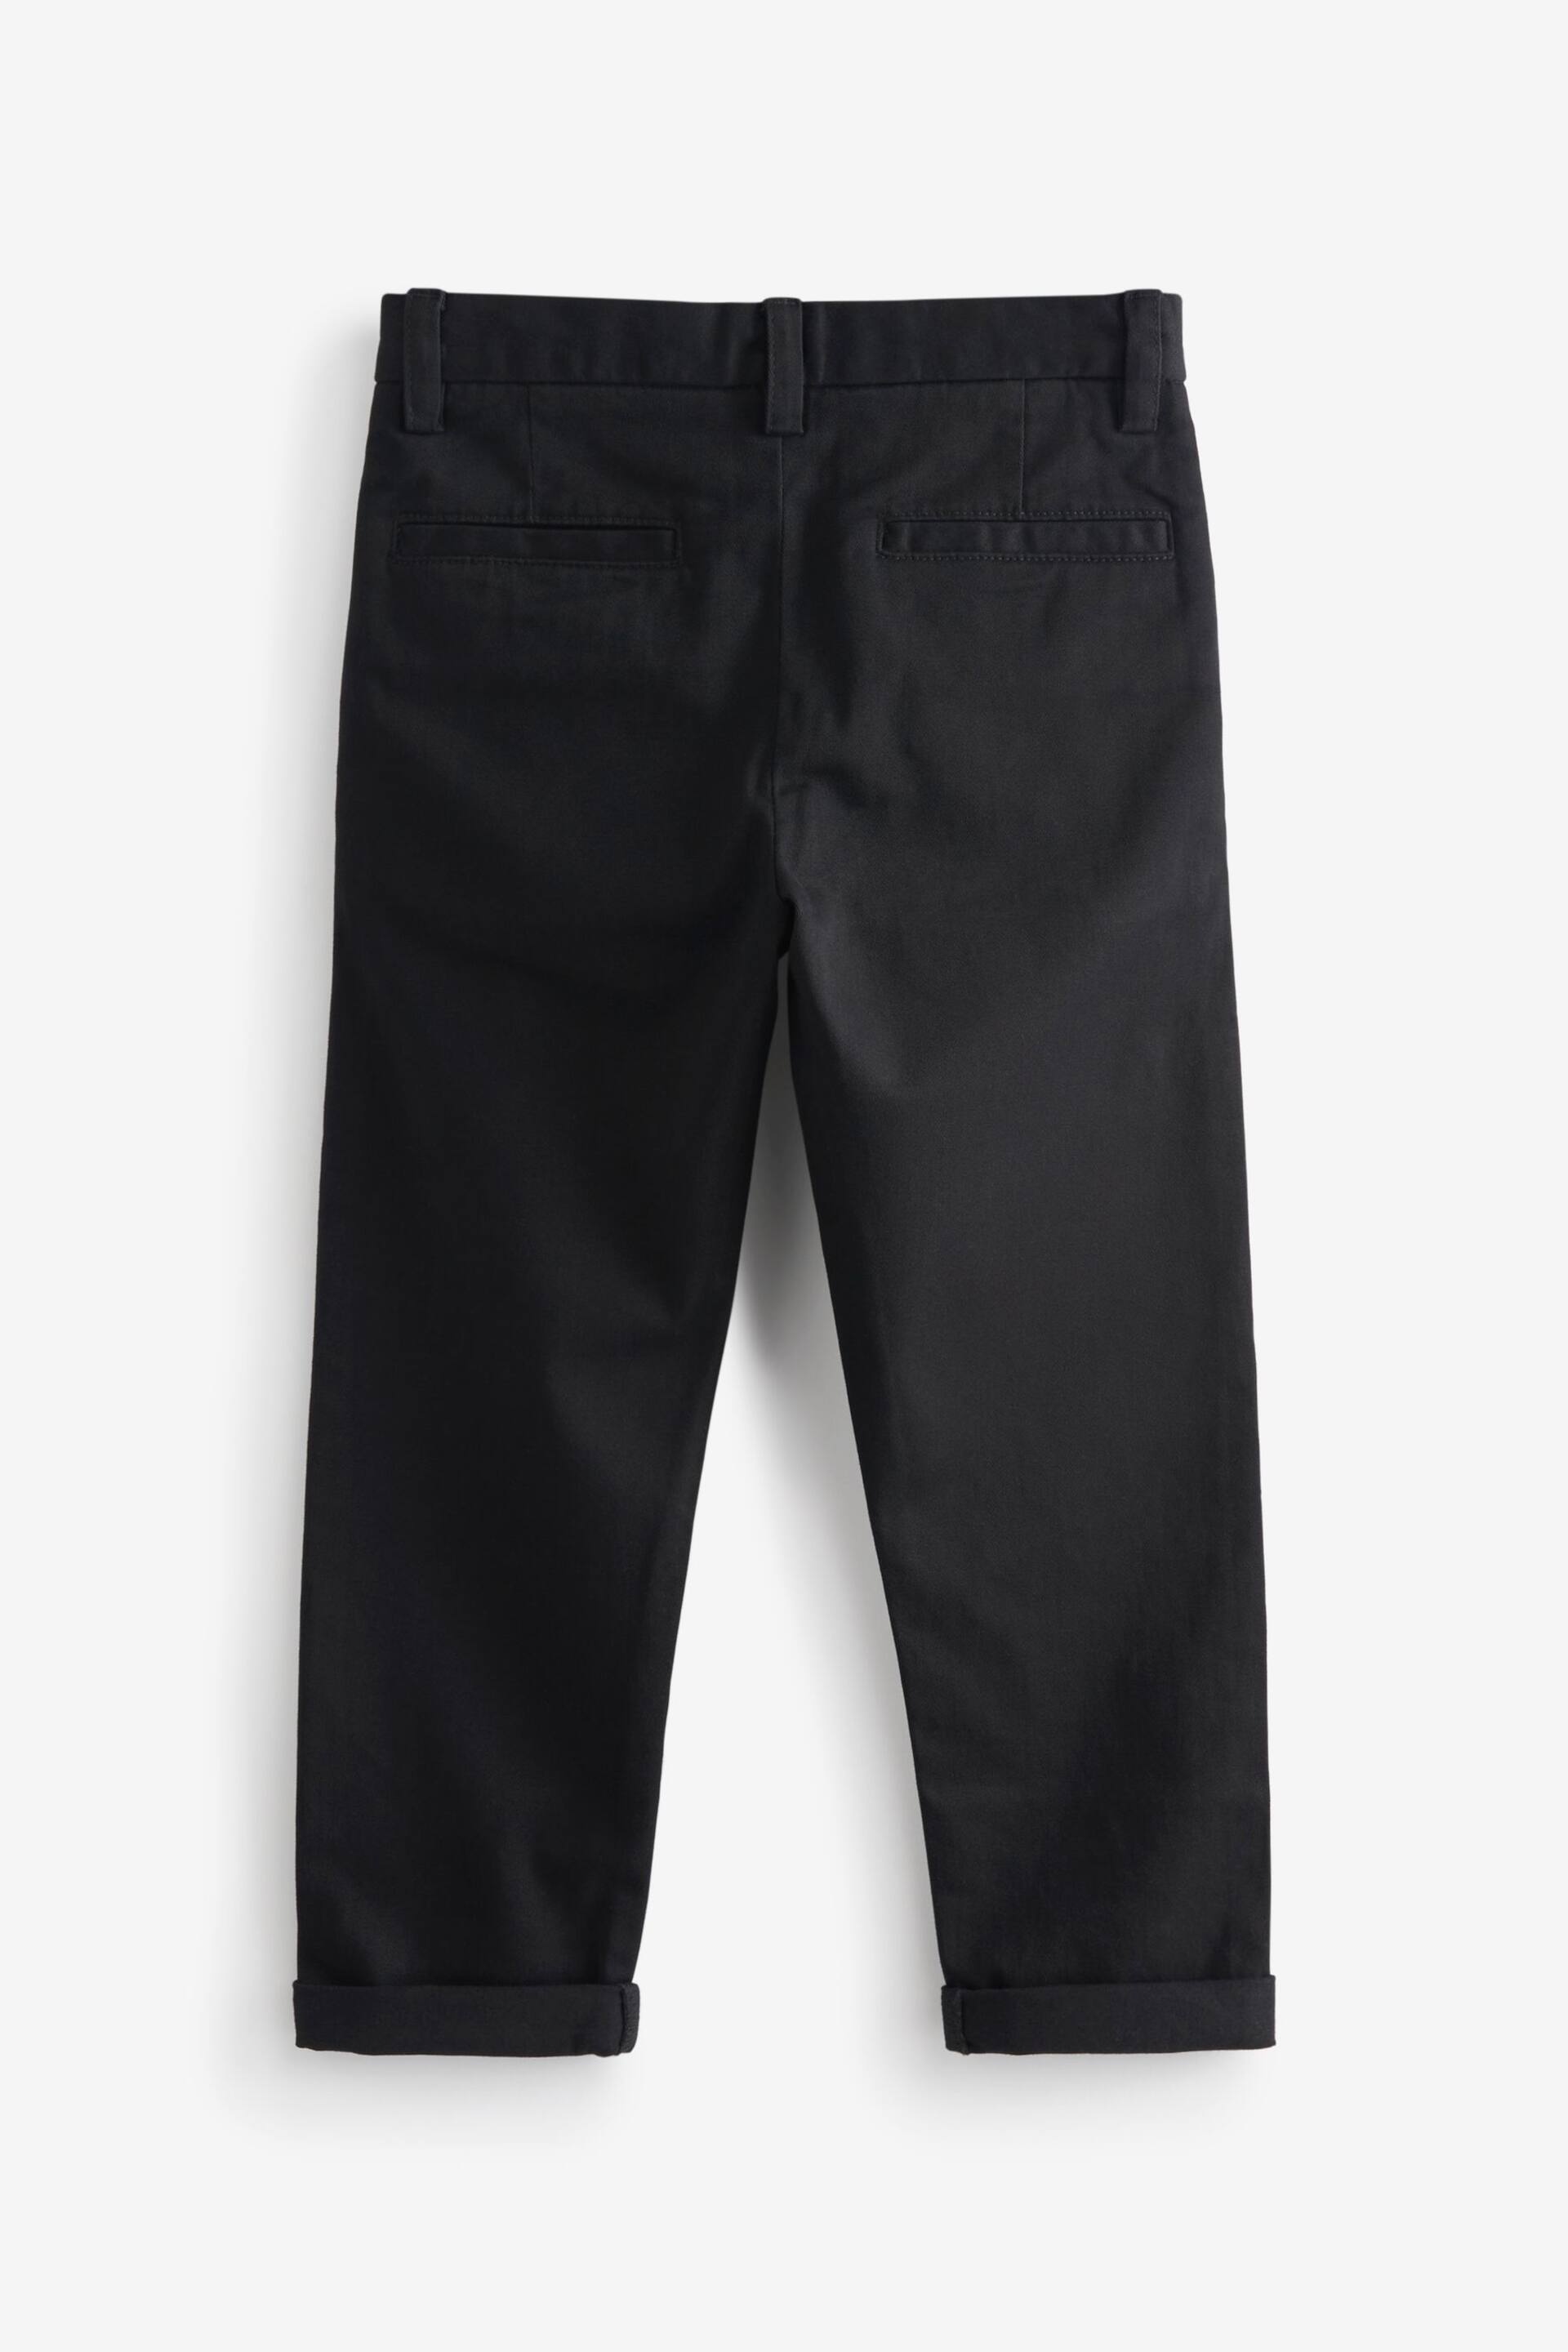 Black Tapered Loose Fit Stretch Chino Trousers (3-17yrs) - Image 2 of 2